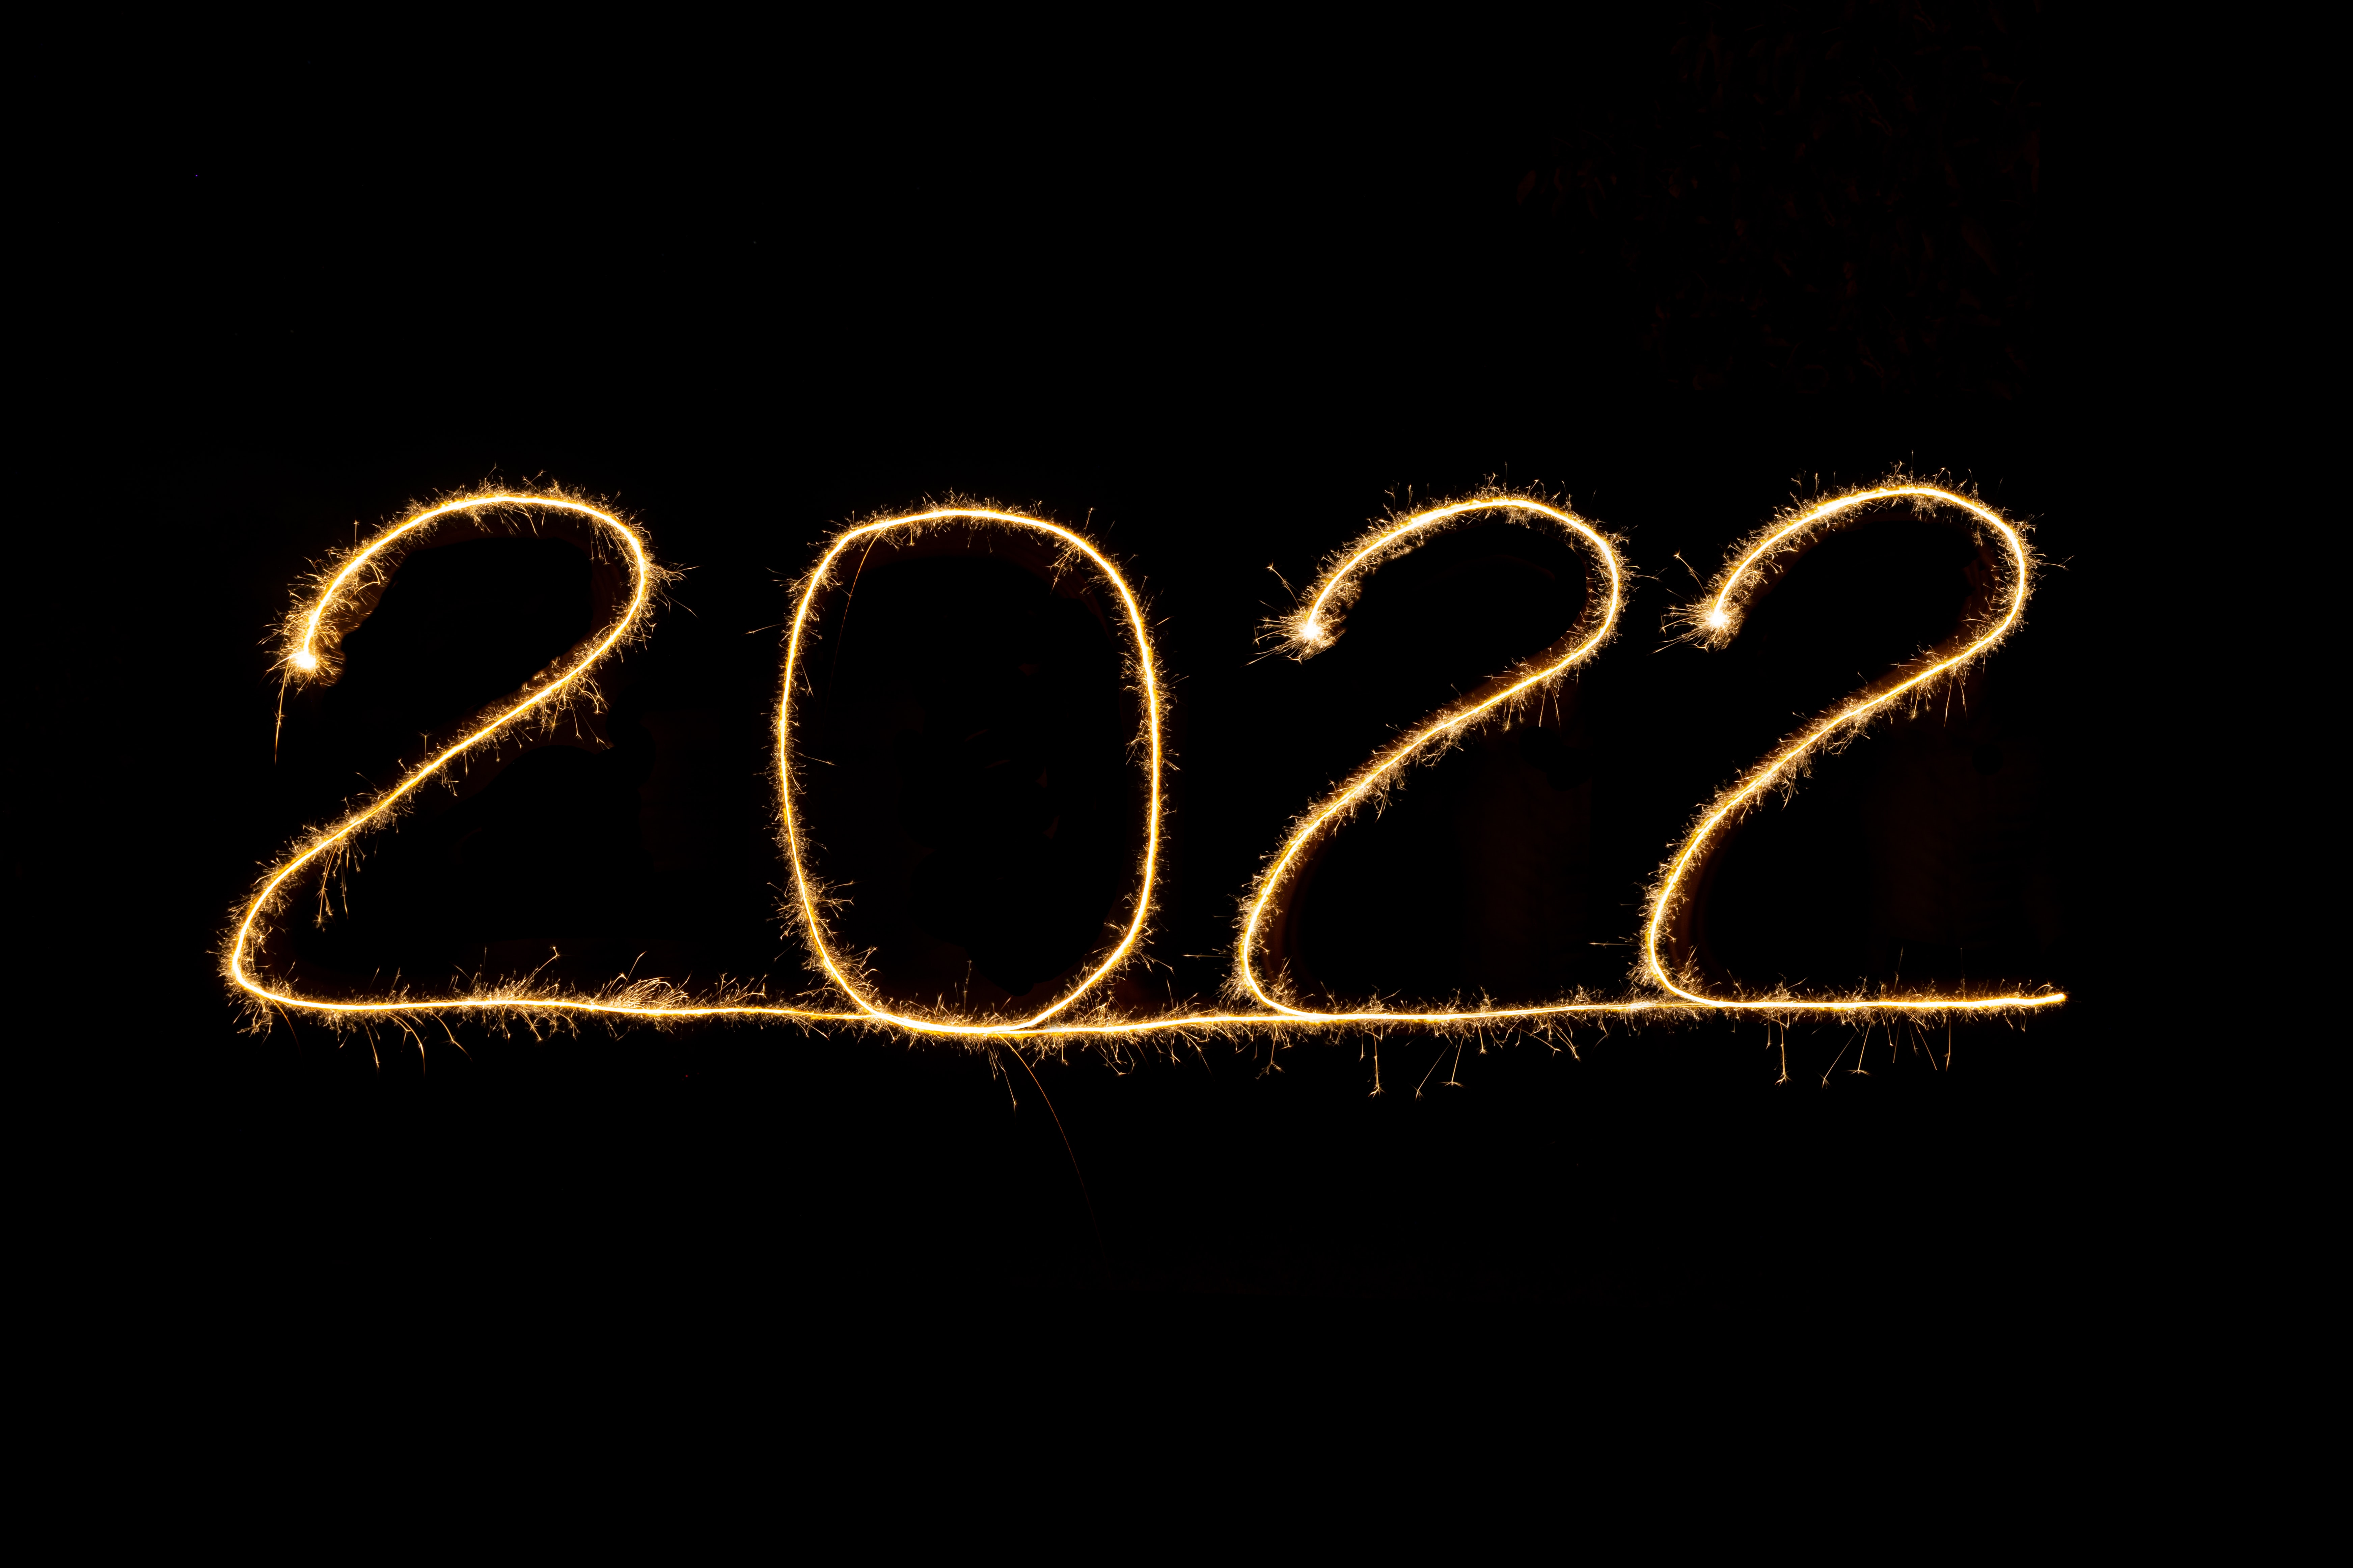 Things to look forward to in 2022